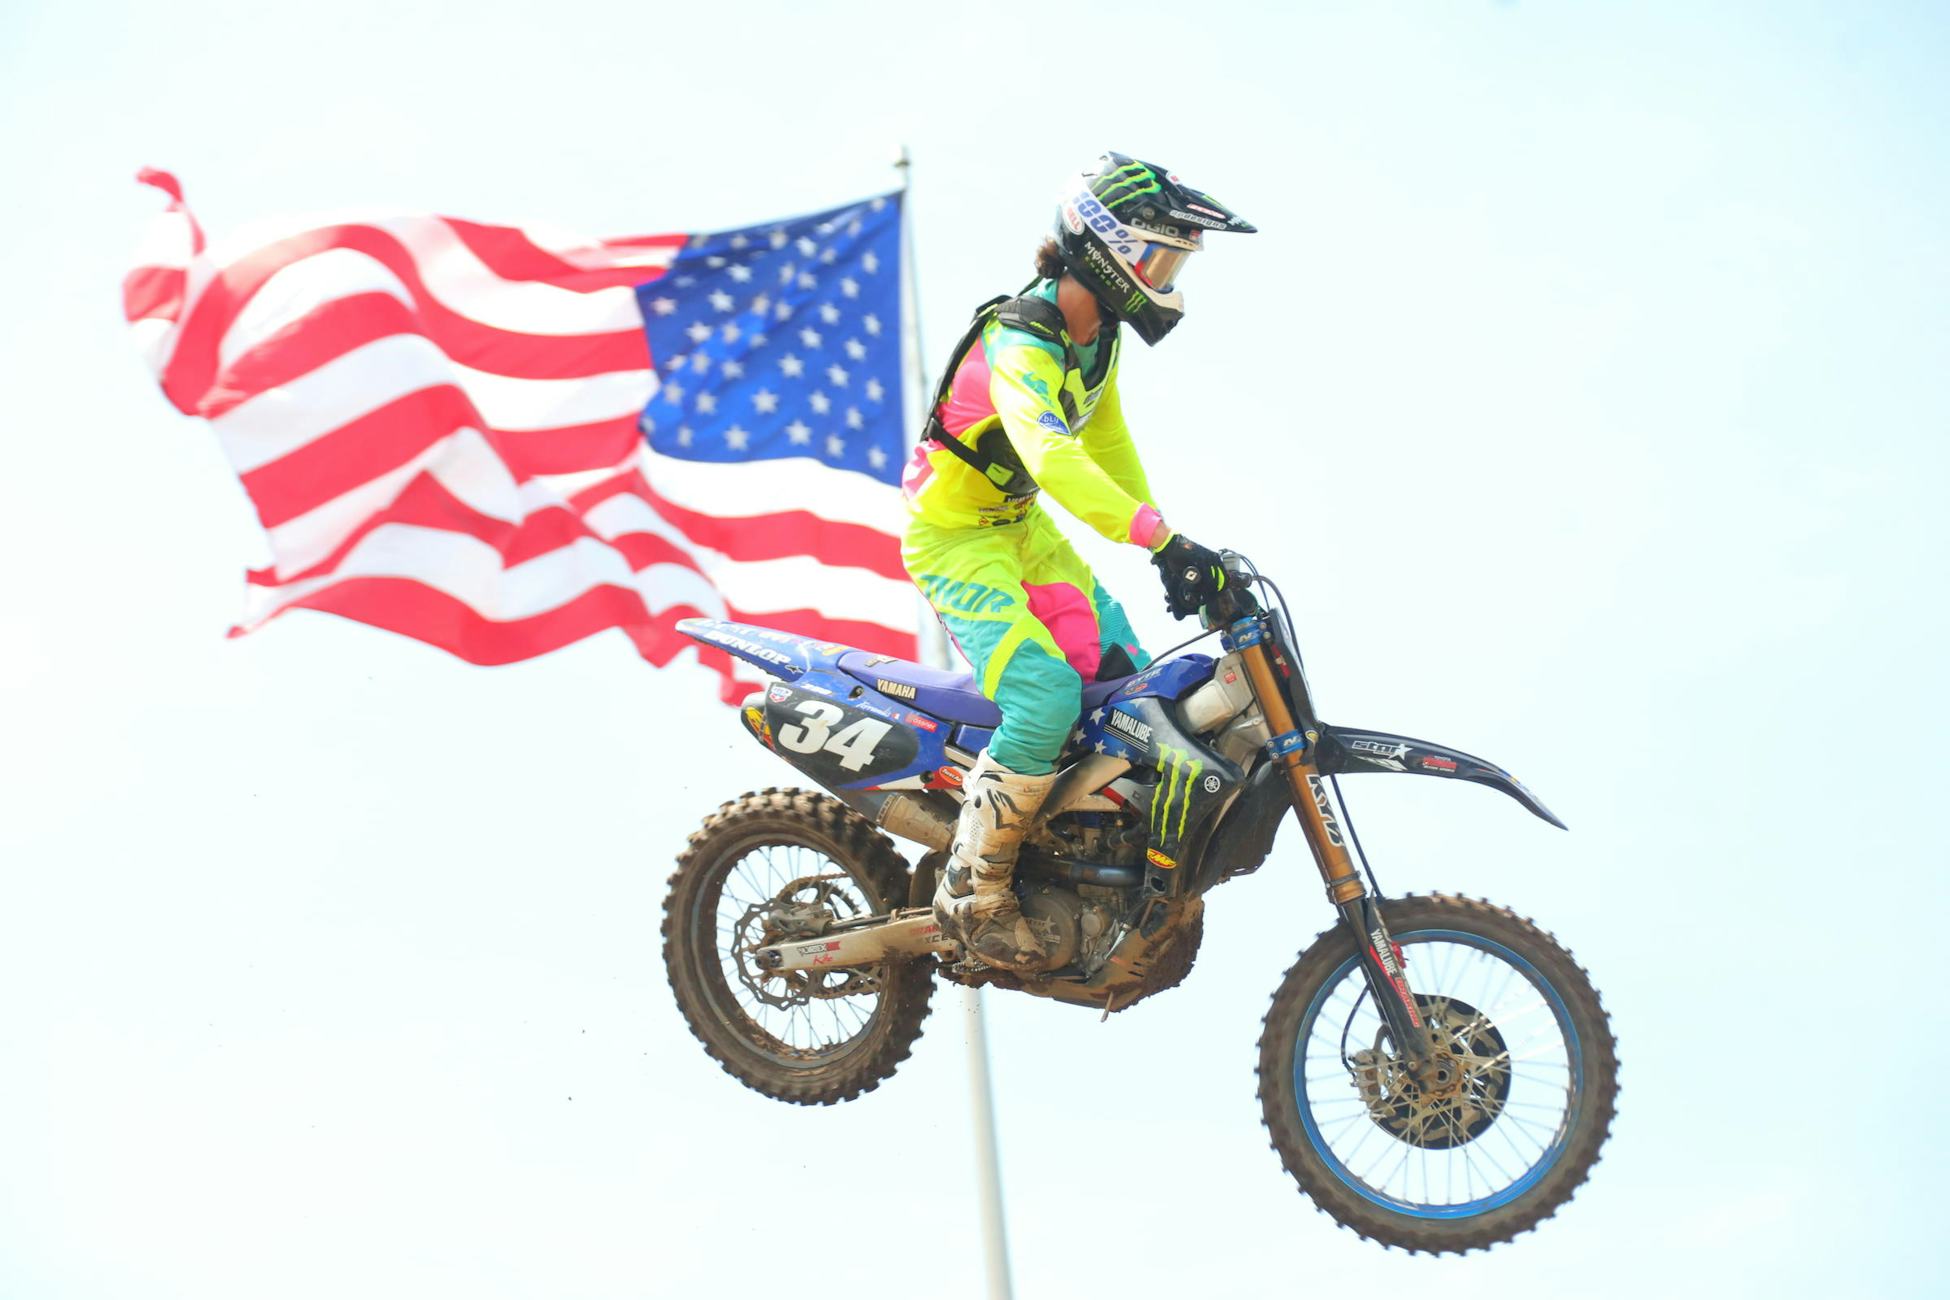 Ferrandis swept both motos for his first victory of the season.